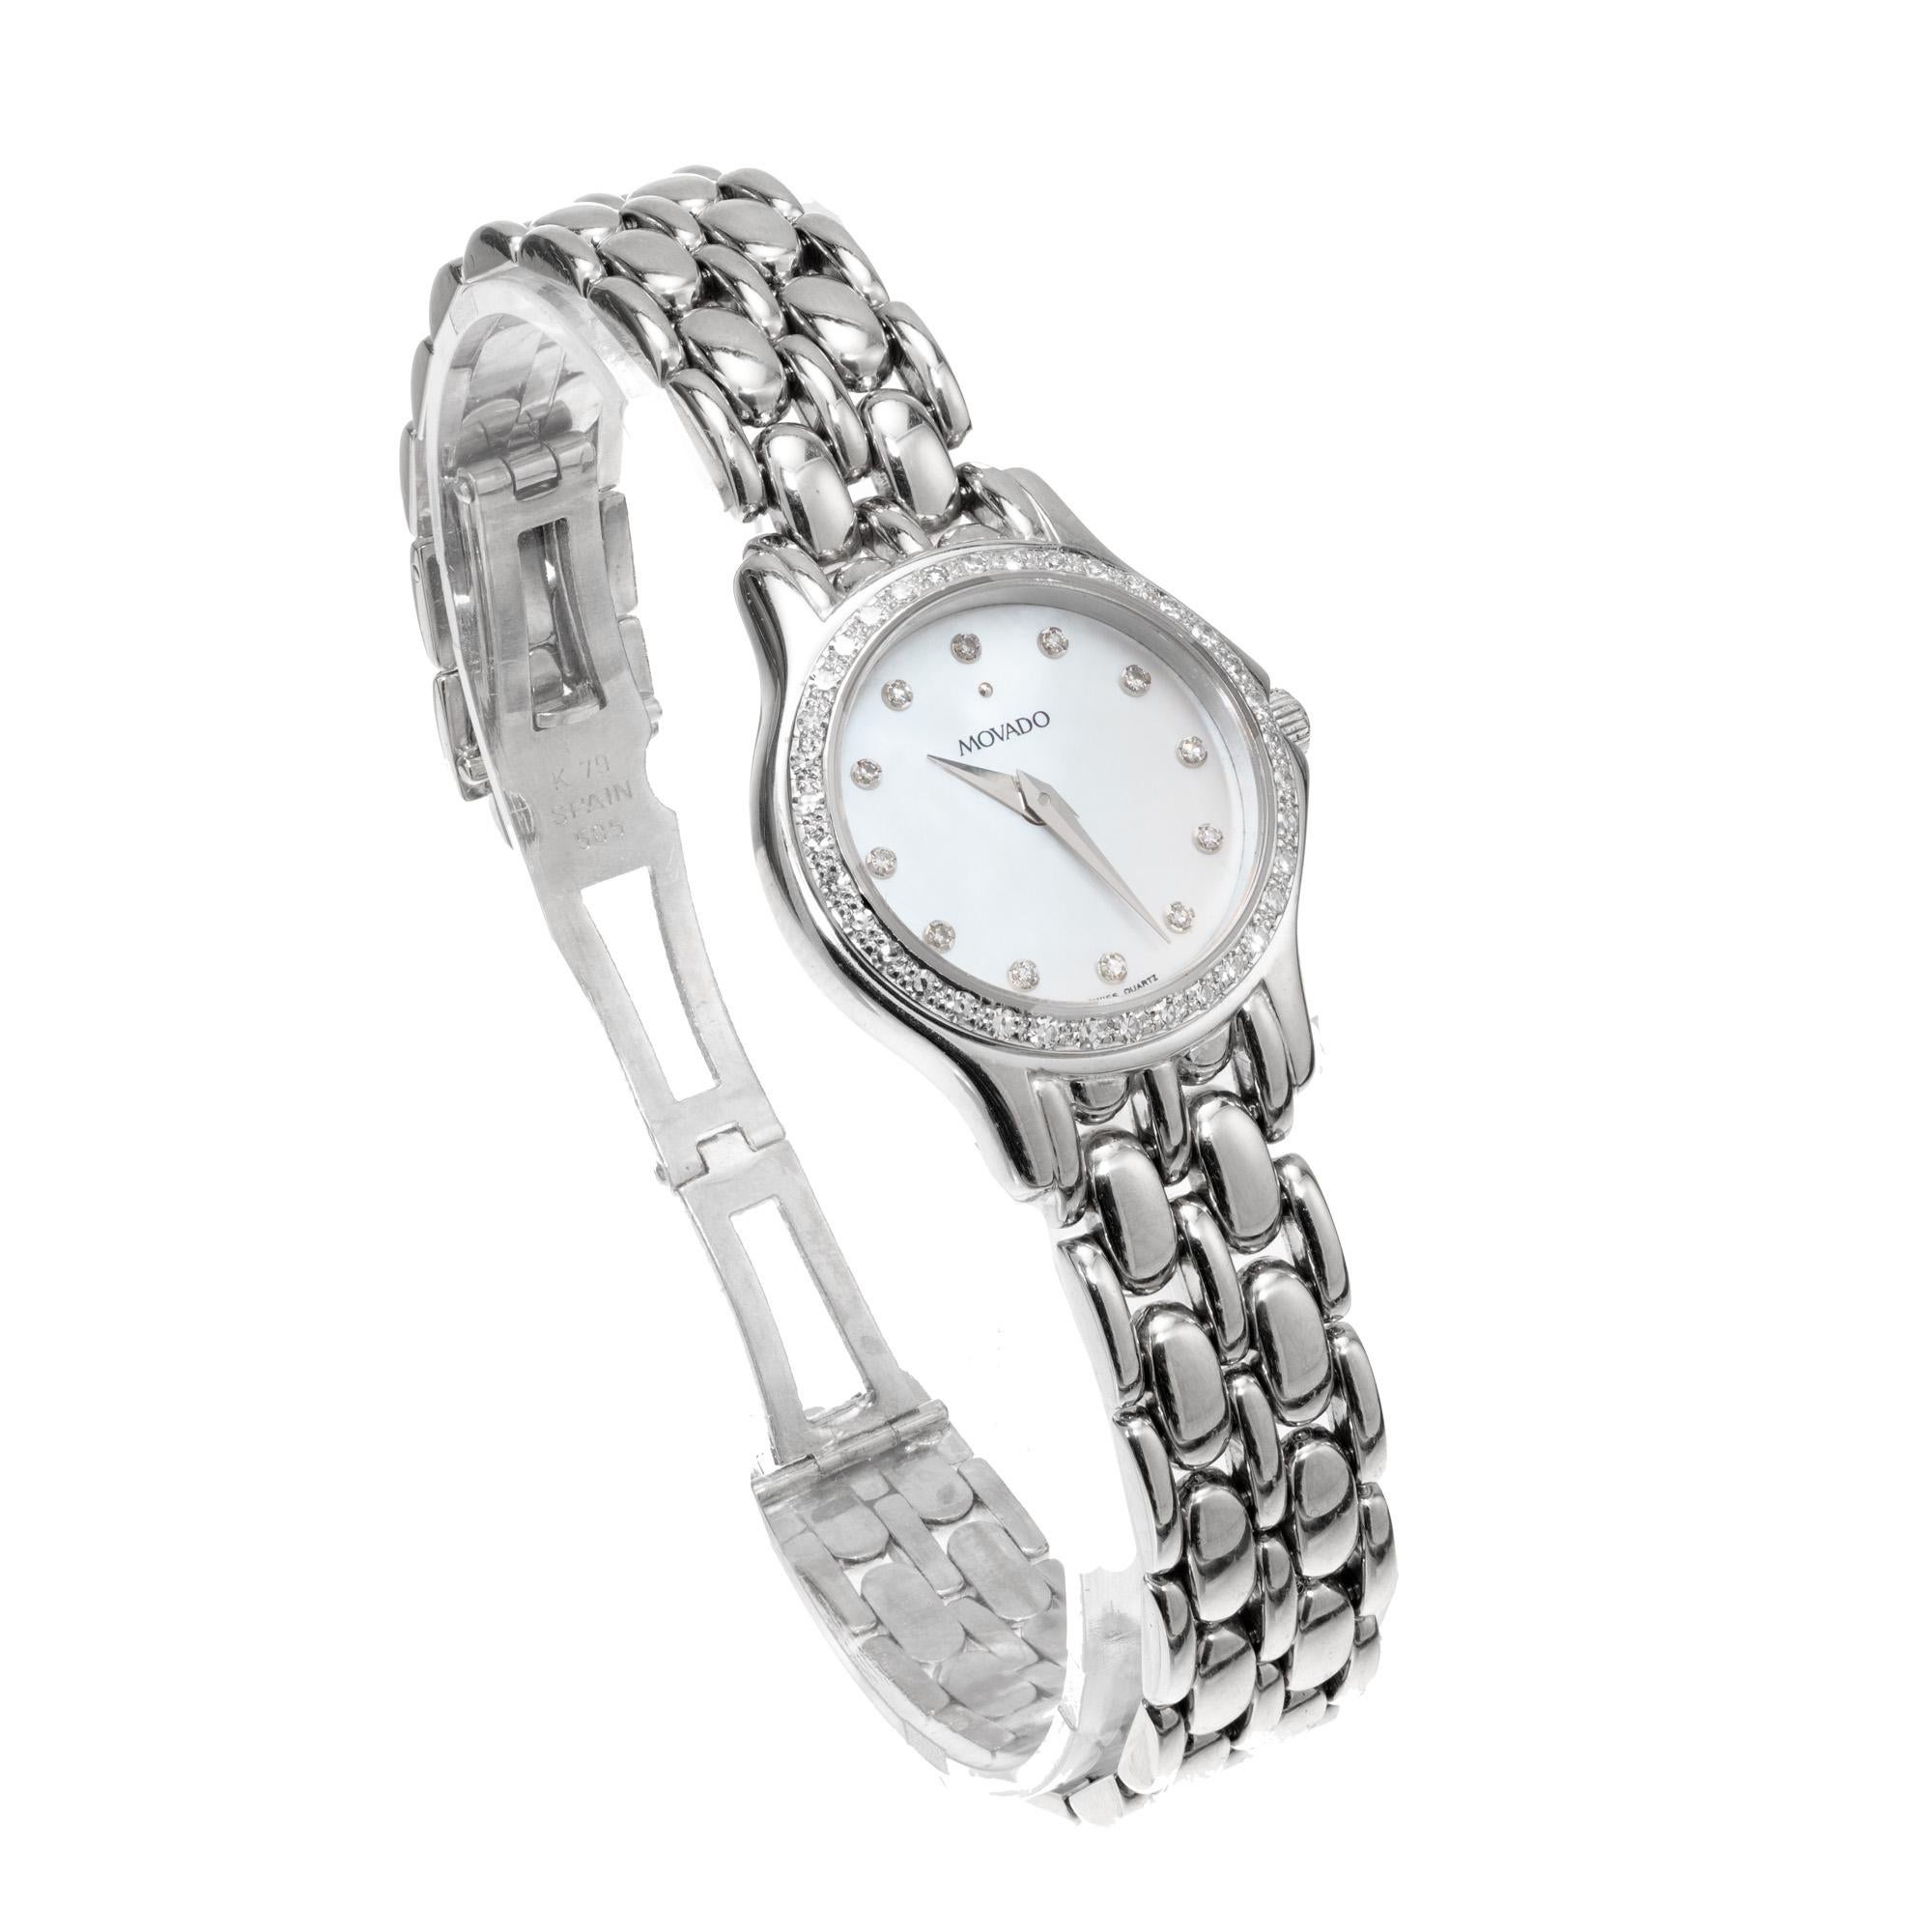 Lady's Movado 14k white gold wristwatch with a diamond bezel and diamond markers. 

Length: 27.18mm
Width: 22.48
Band width at case: 10.50mm
Case thickness: 5.75mm
Band: 14k white gold panther
Crystal: sapphire
Dial: white with diamond